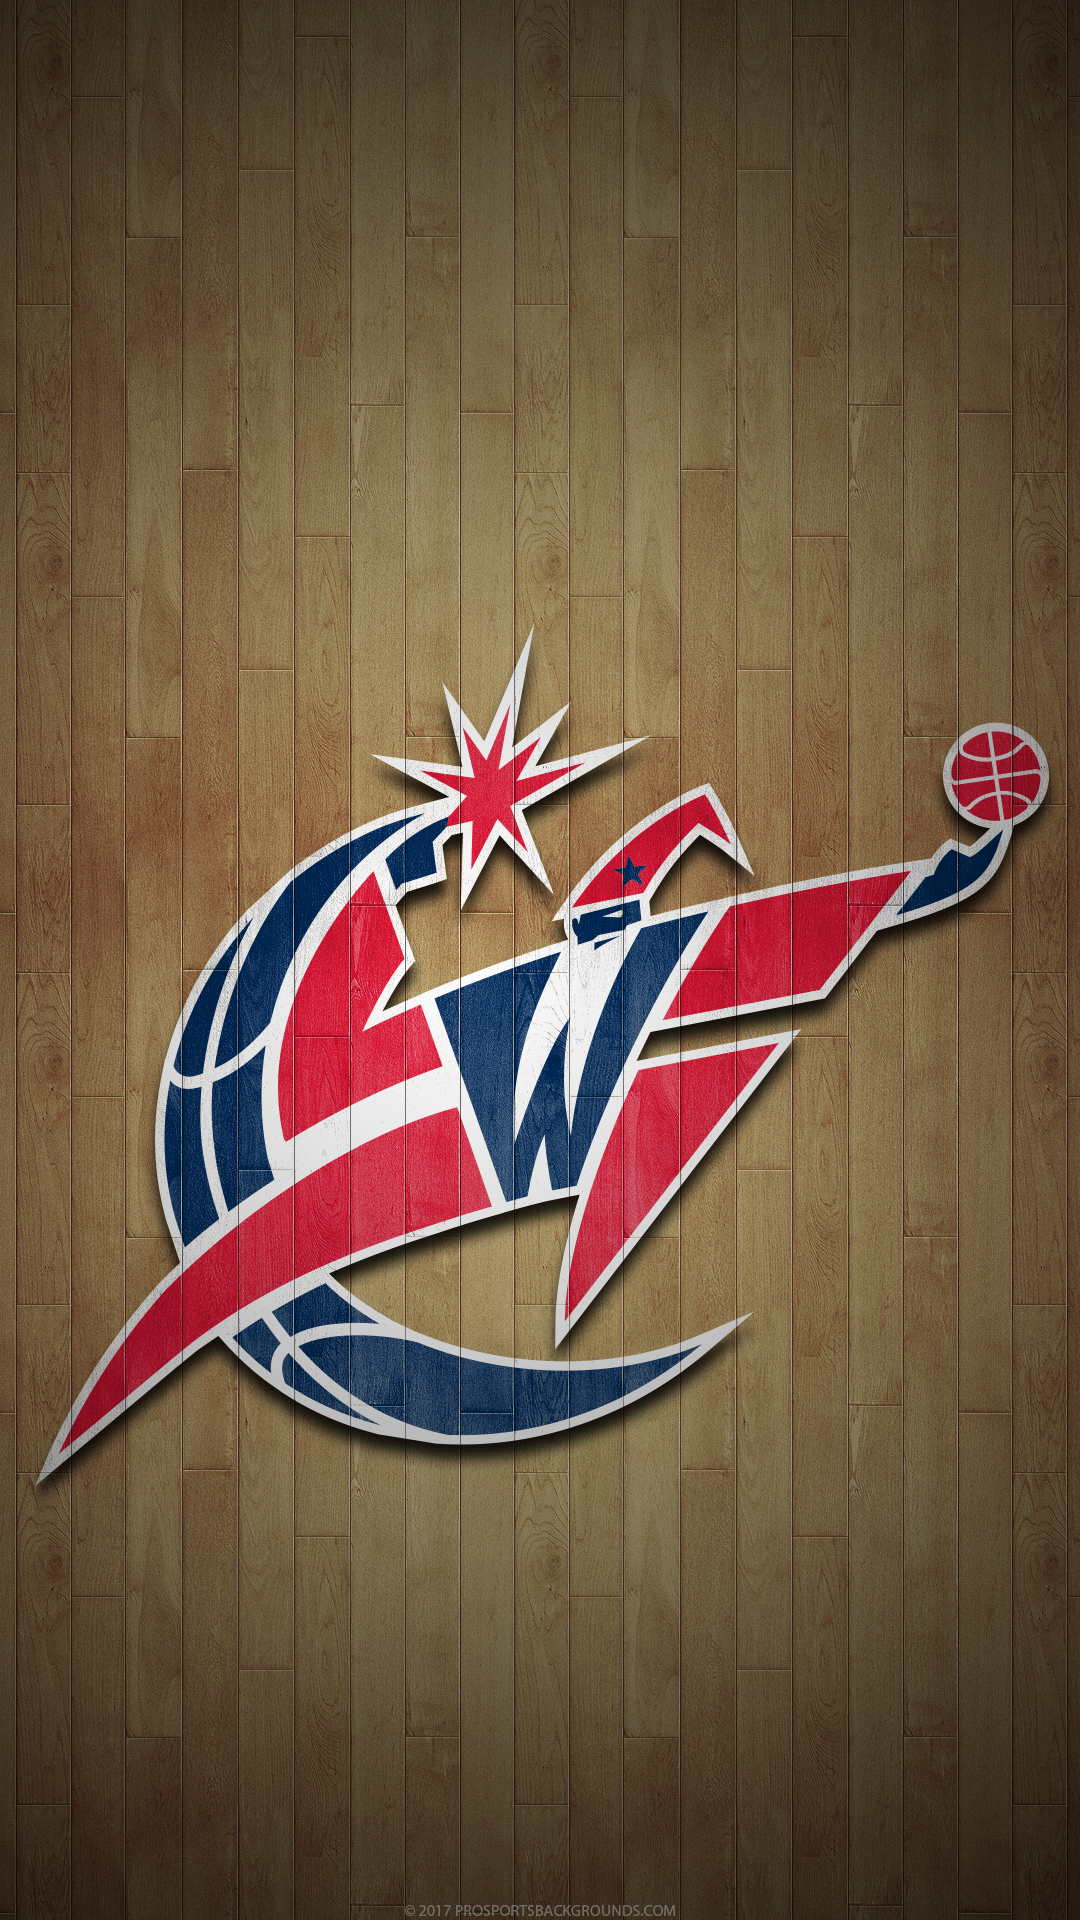 Washington Wizards Wallpapers 62 pictures